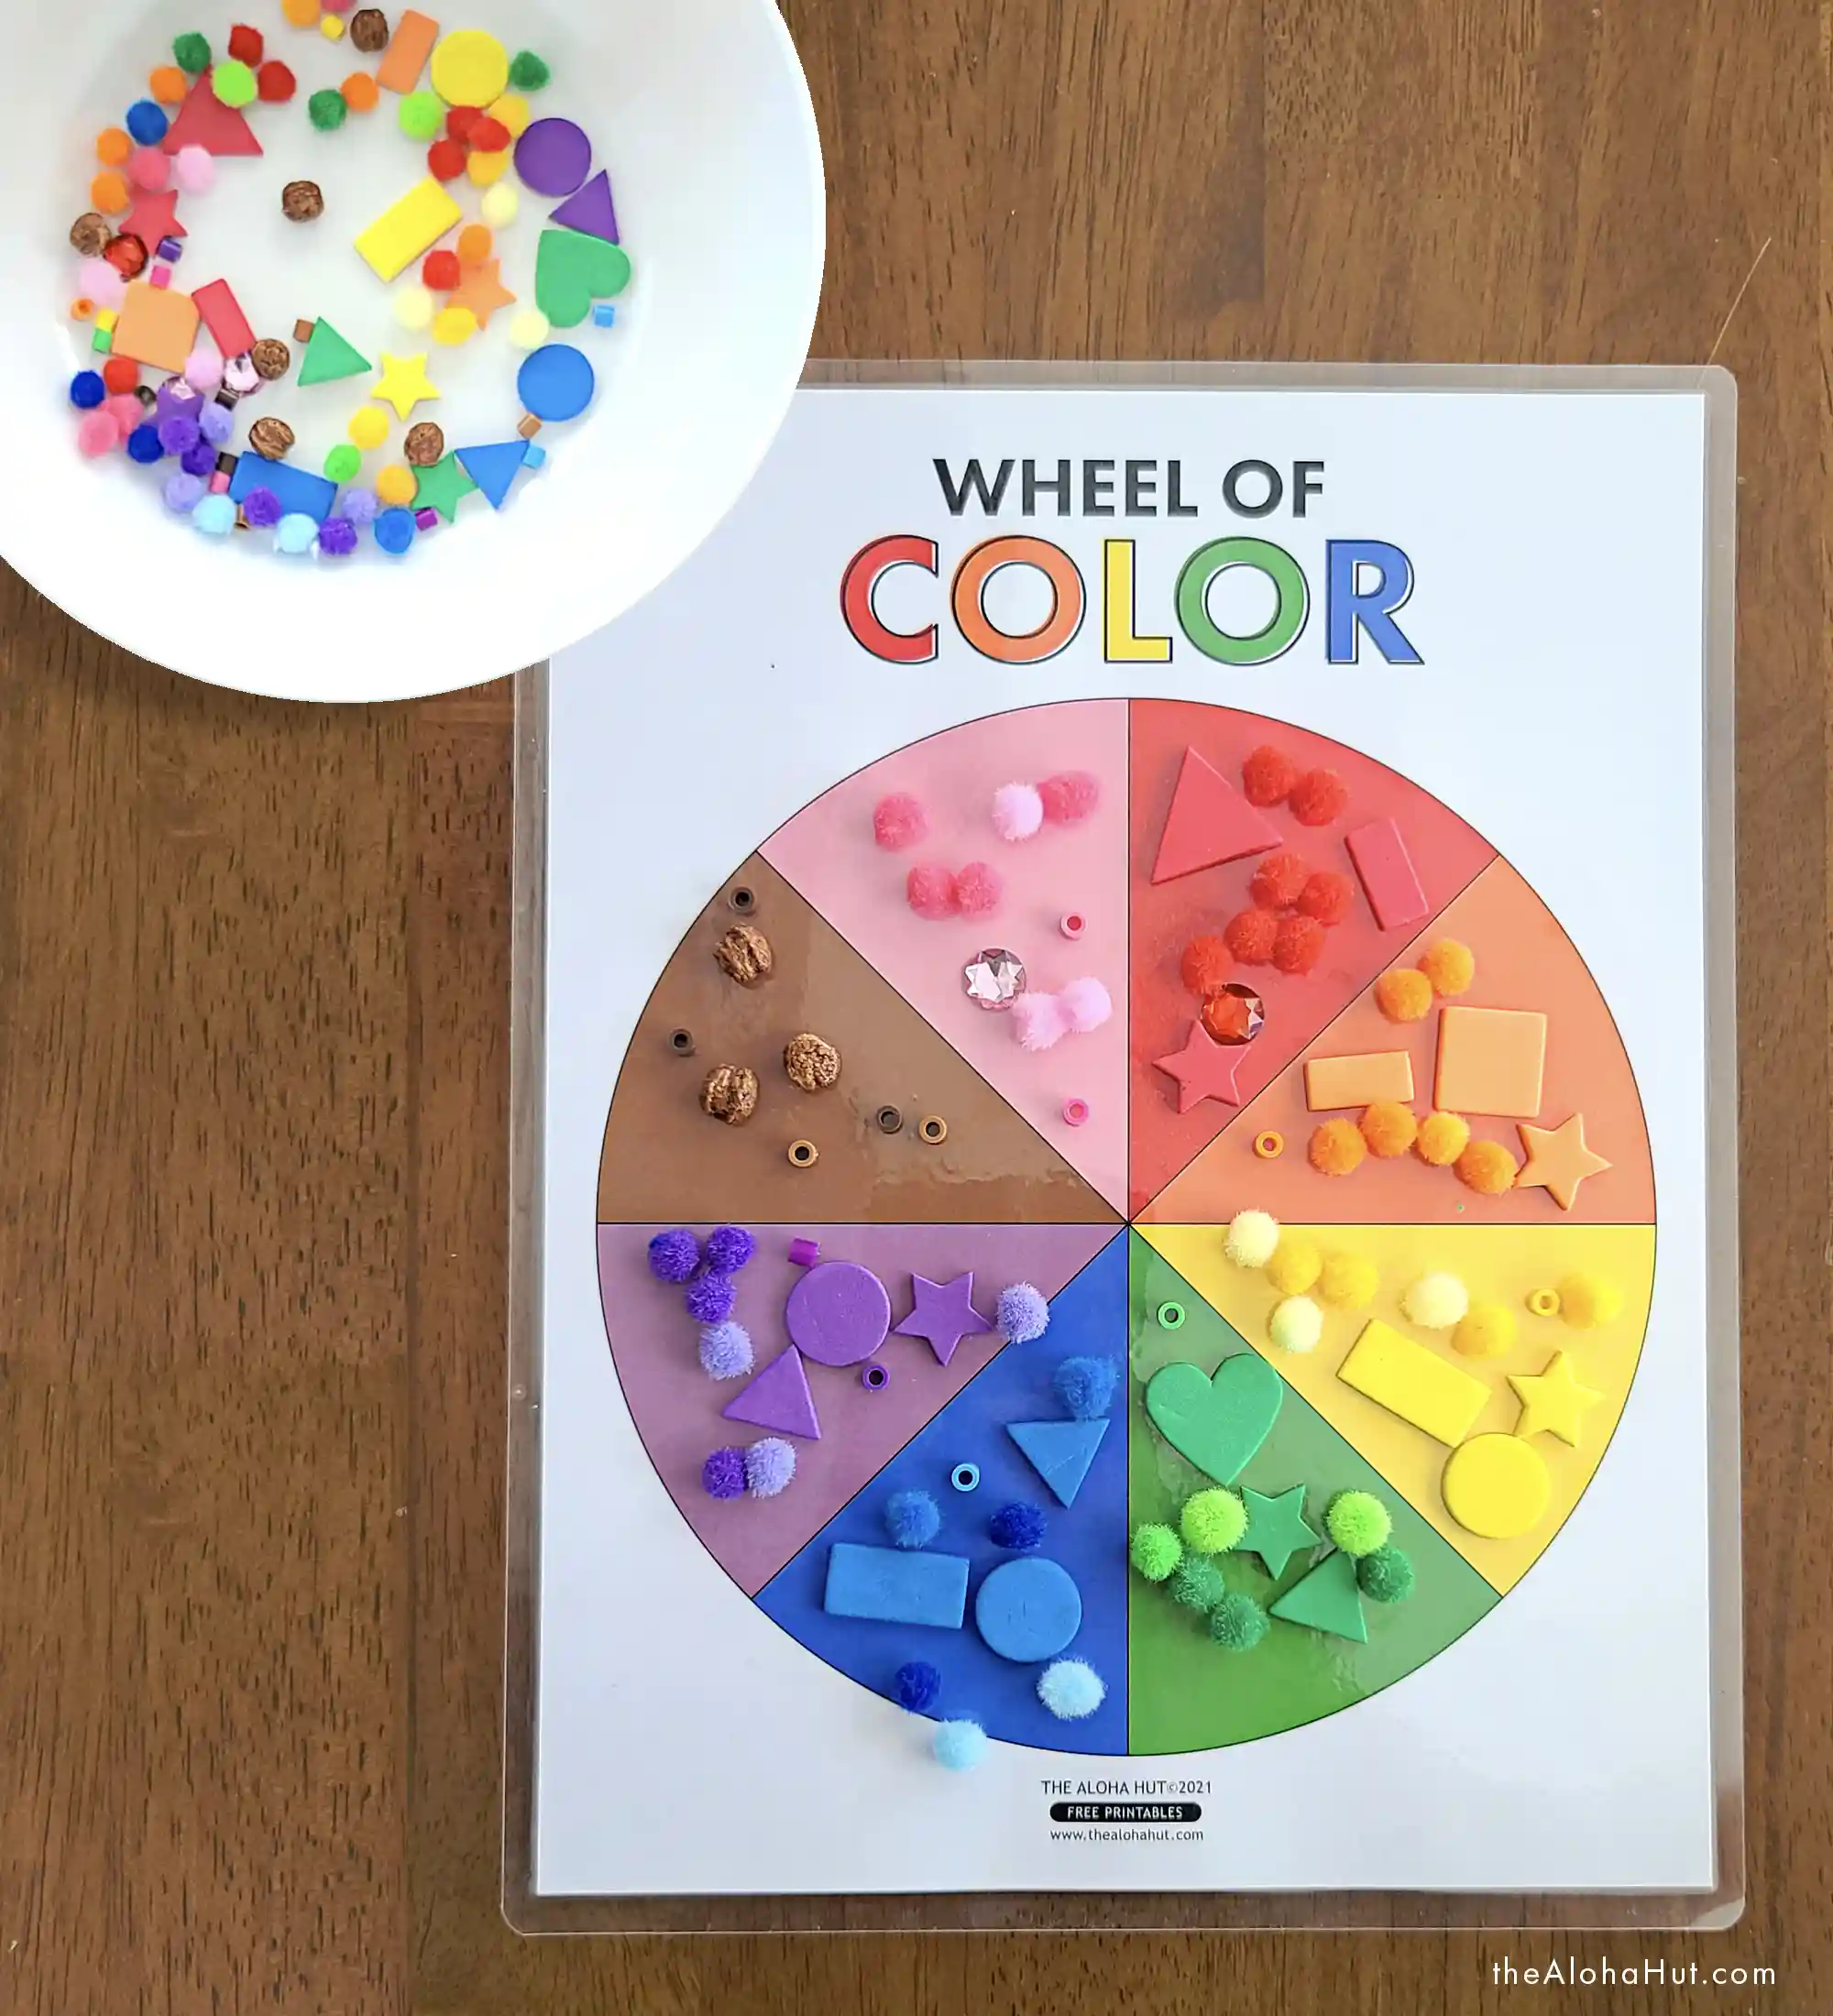 Printable preschool and toddler activity pages for early childhood learning. These printable color wheel and color block worksheets are perfect for helping your little one learn their colors. Use them to sort objects, toys, etc by color. You could even use them as playdough mats!